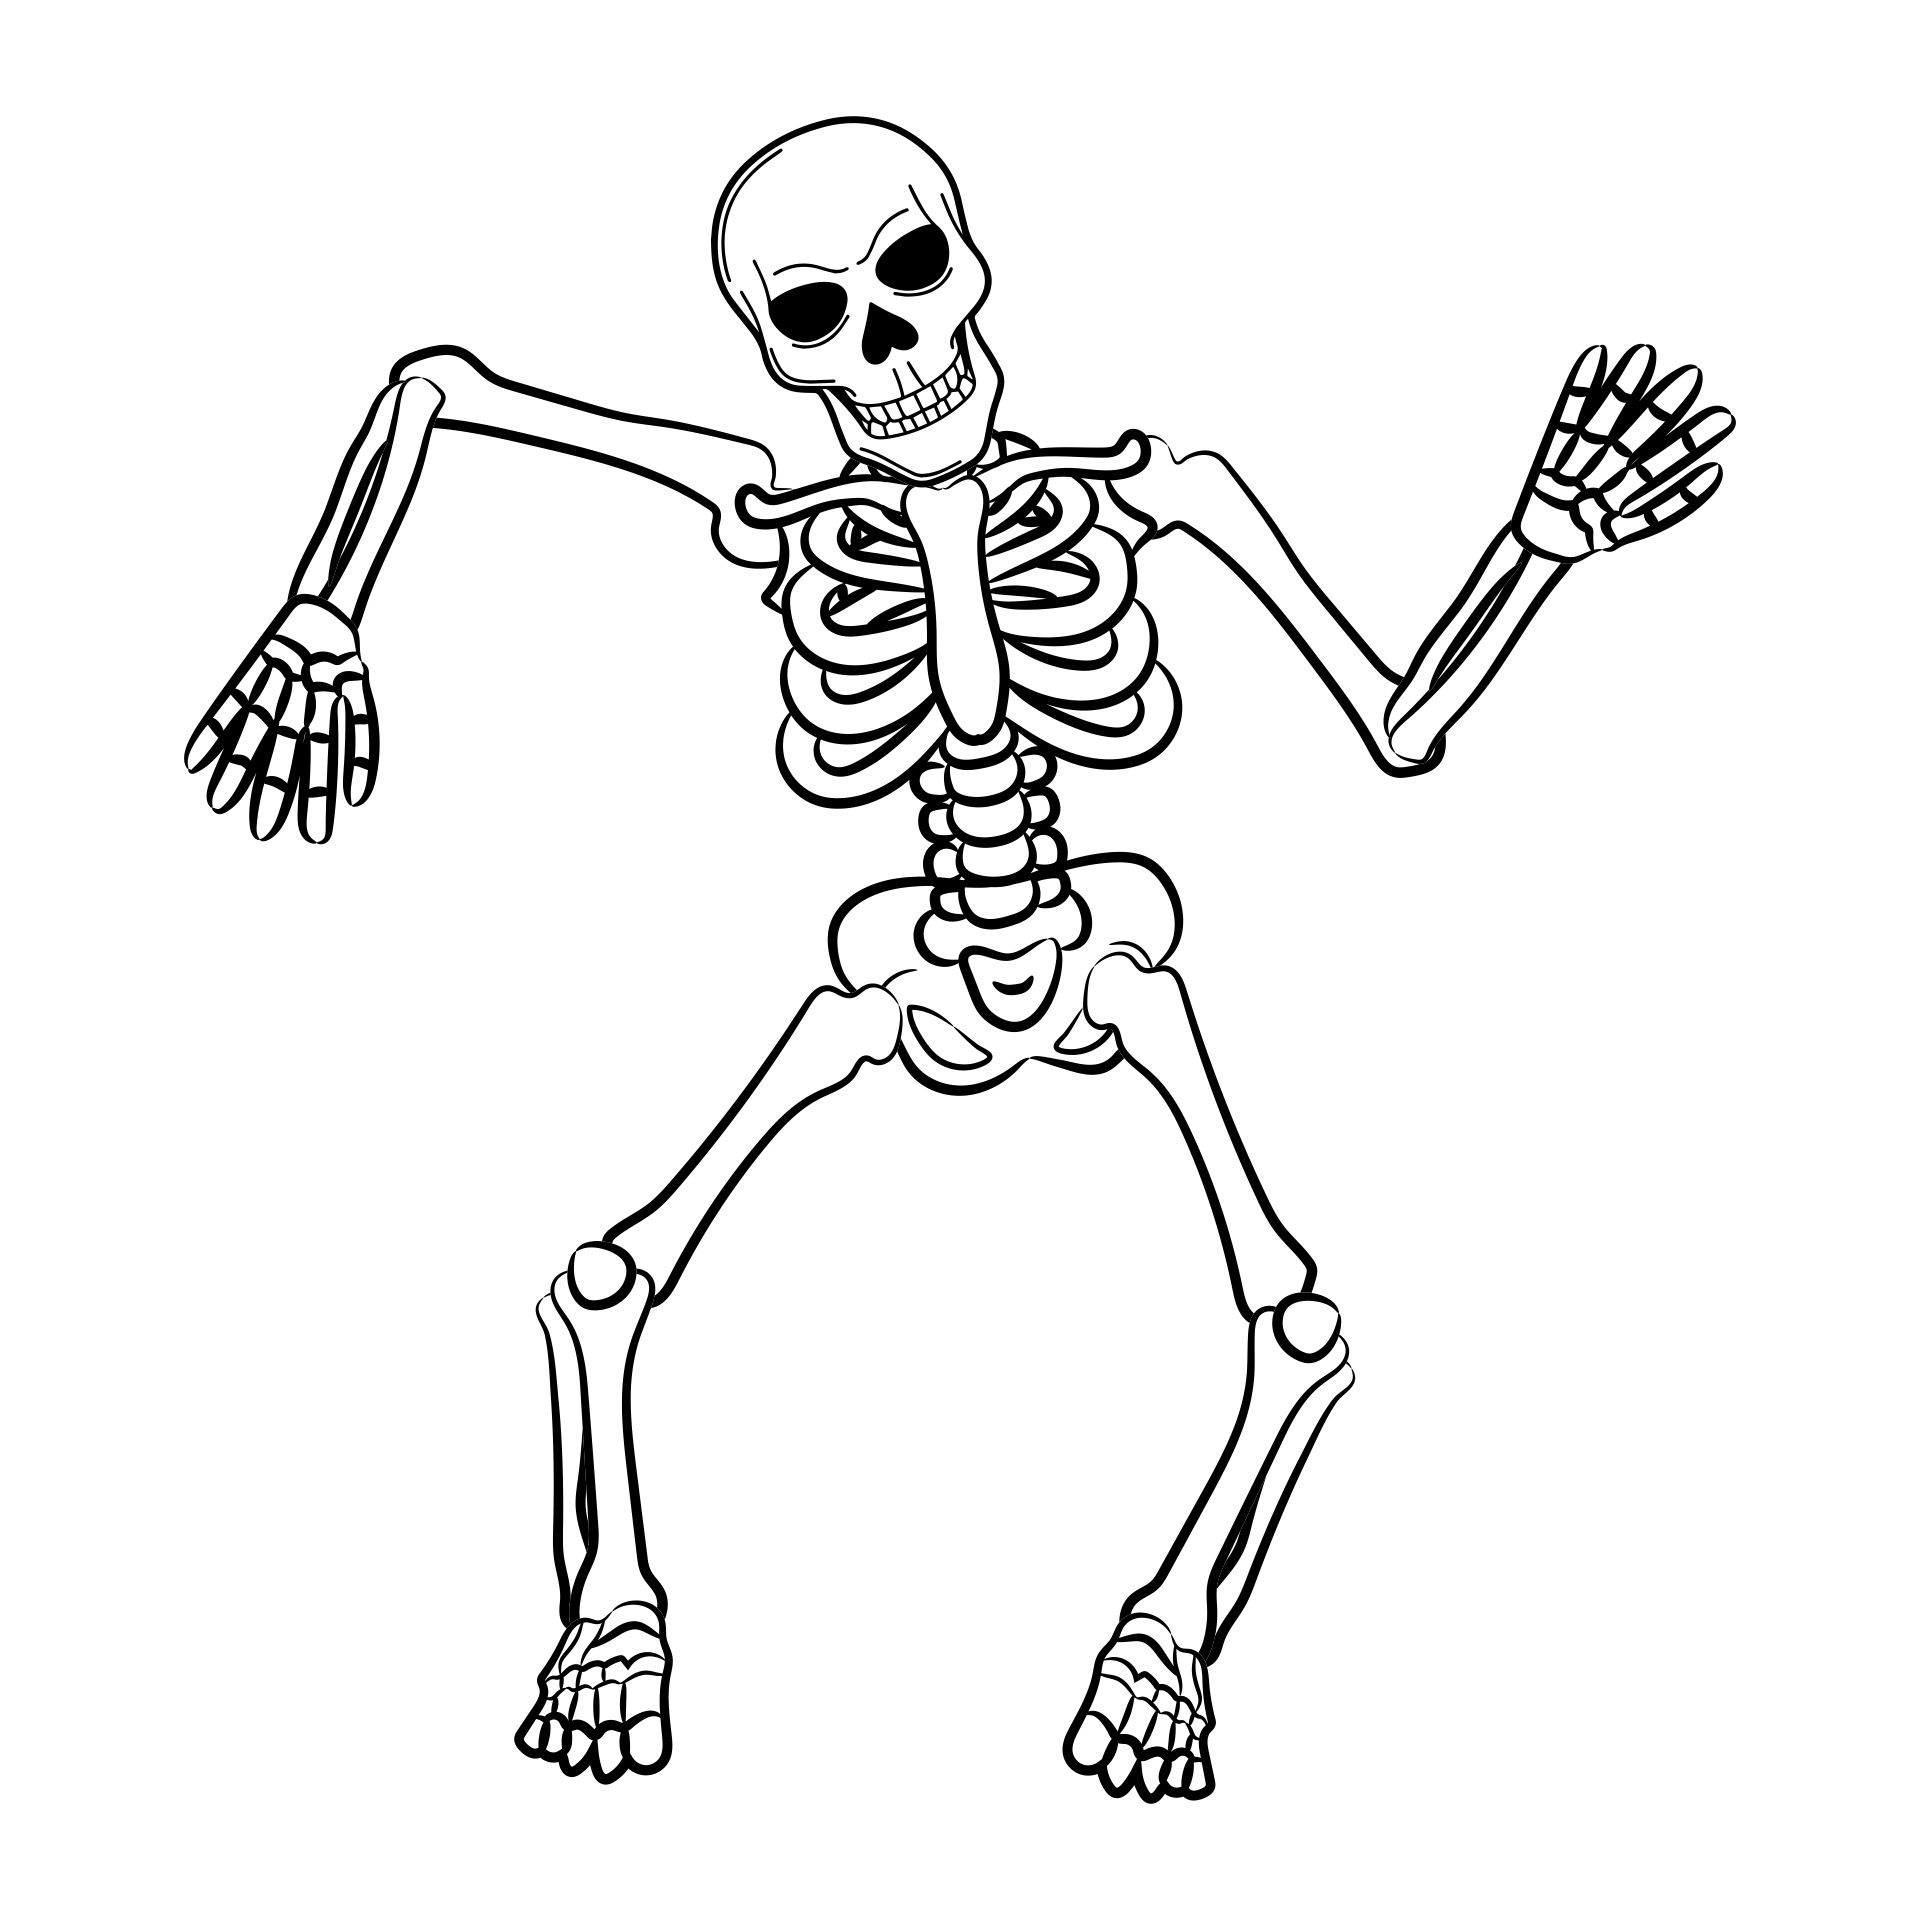 41-scary-skeleton-coloring-pages-printable-coloring-pages-for-free